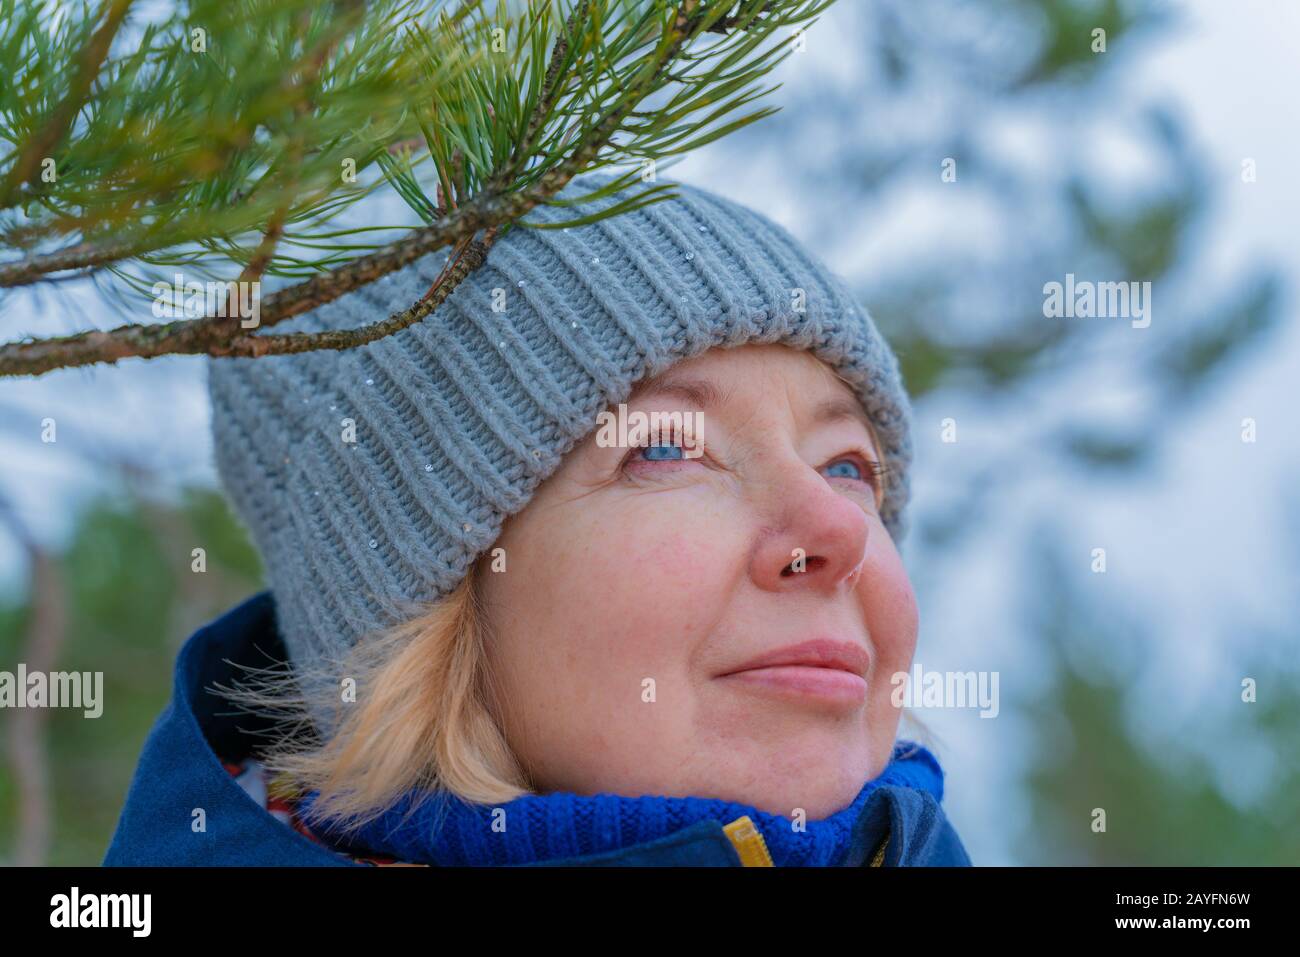 Female wearing blue knitted hat. Cheerful mature woman smiling. Outdoors cold weather portrait. Face close up. Pine tree background Stock Photo